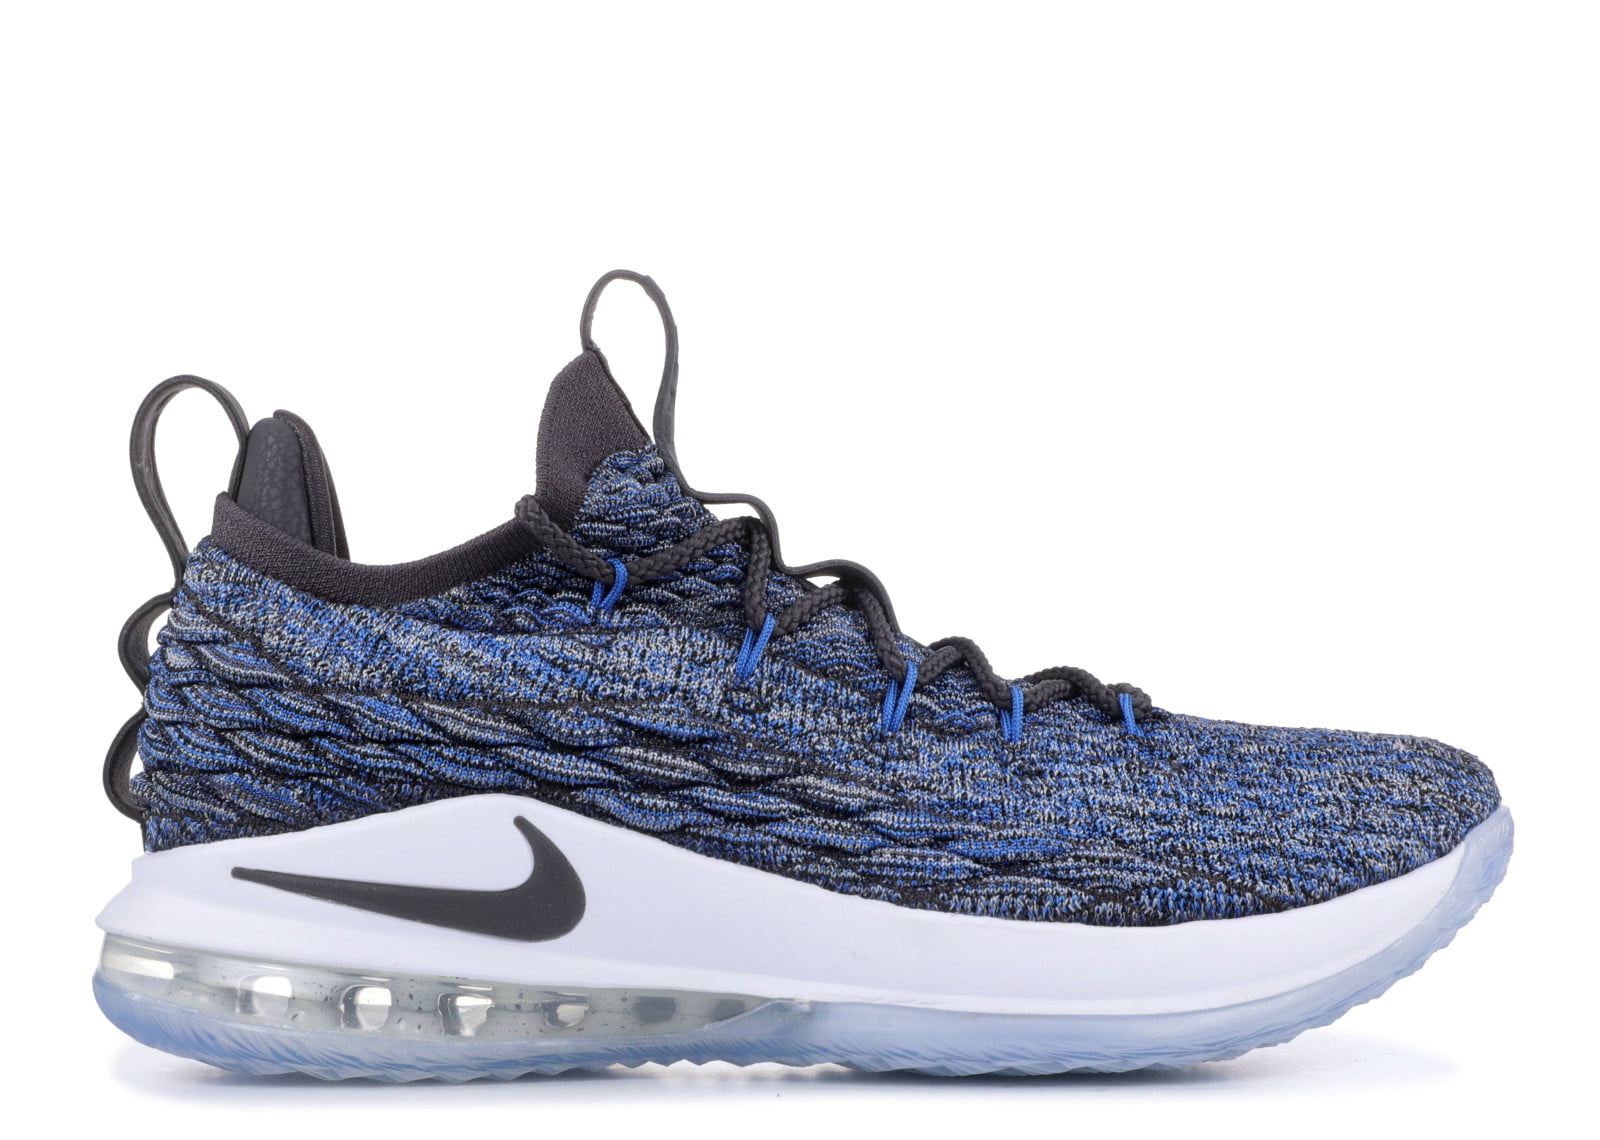 lebron 15 low images